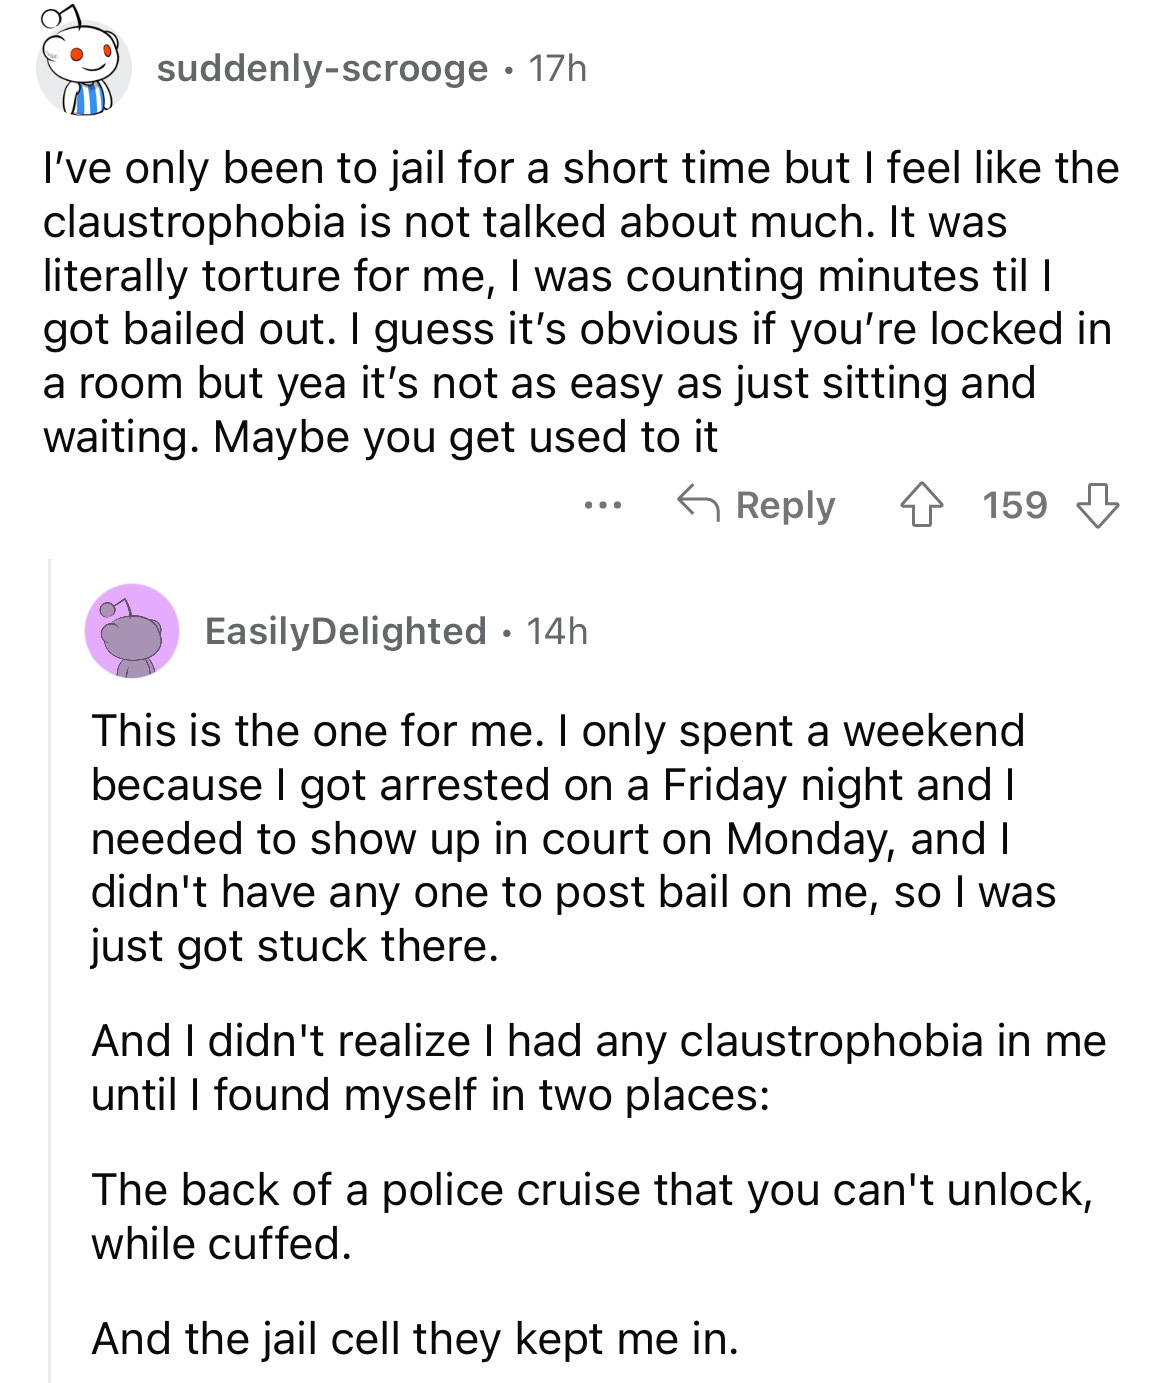 document - suddenlyscrooge 17h I've only been to jail for a short time but I feel the claustrophobia is not talked about much. It was literally torture for me, I was counting minutes til l got bailed out. I guess it's obvious if you're locked in a room bu